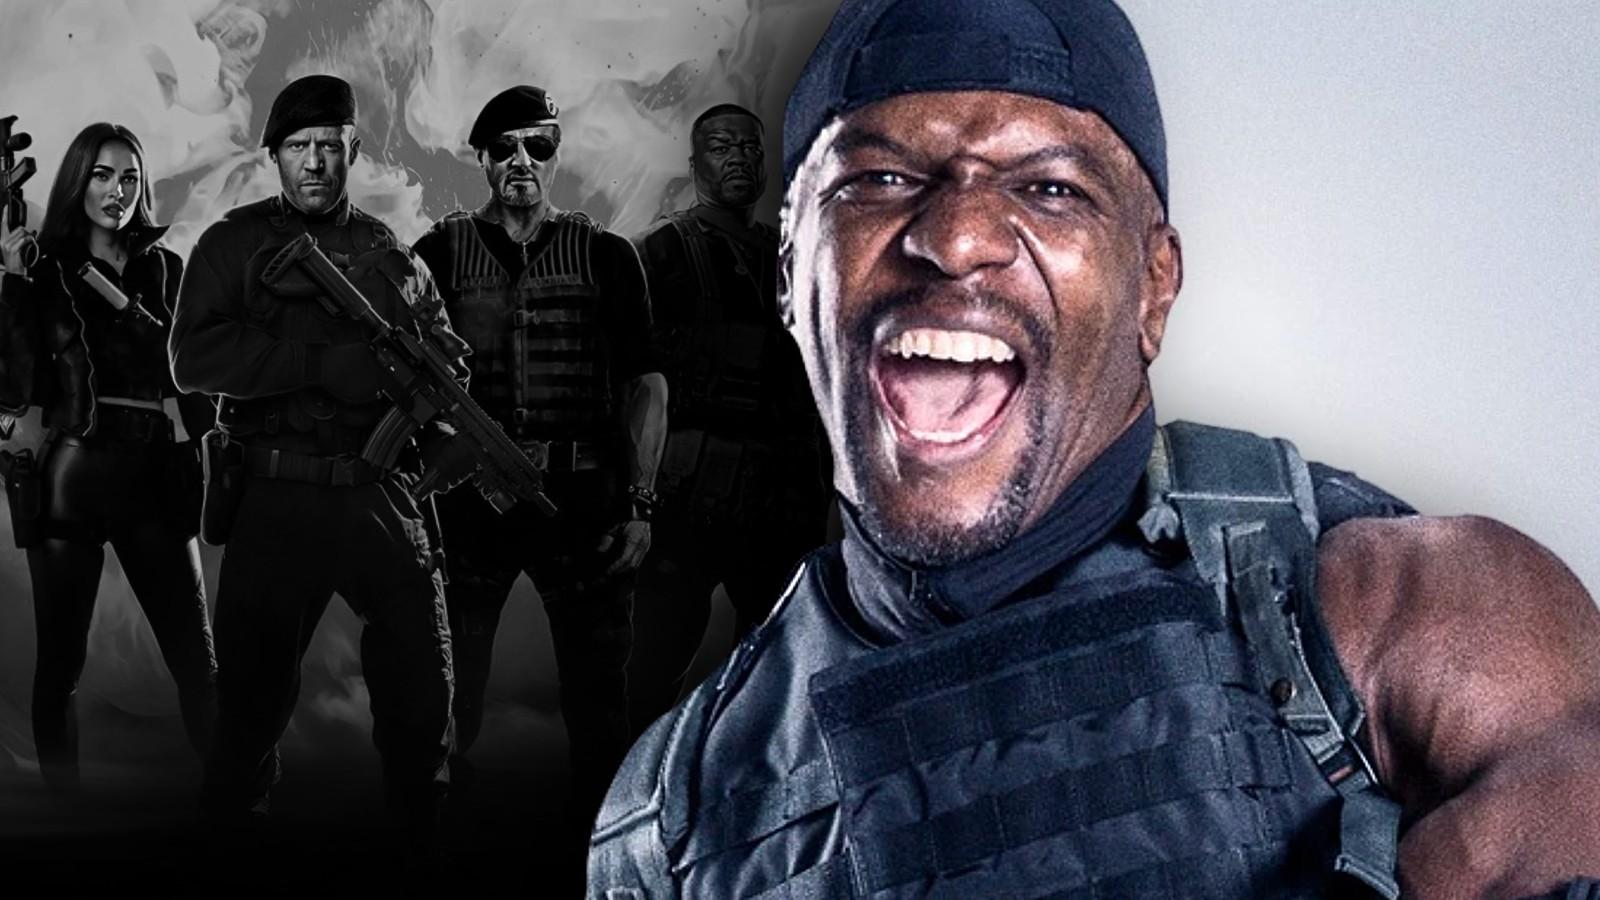 Terry Crews as Hale Caesar and the cast of The Expendables 4